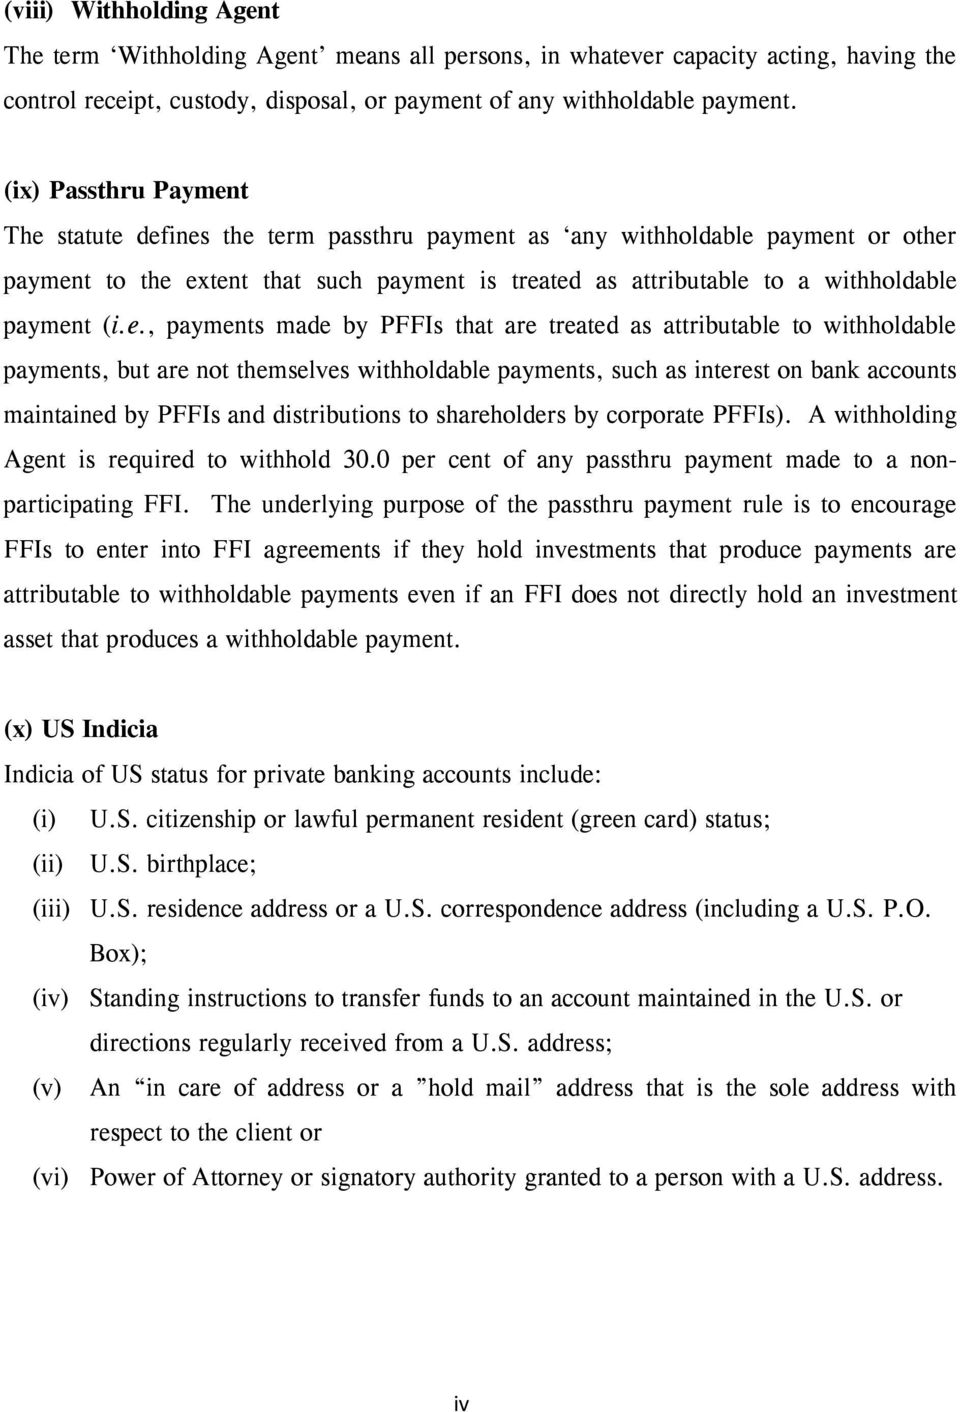 (i.e., payments made by PFFIs that are treated as attributable to withholdable payments, but are not themselves withholdable payments, such as interest on bank accounts maintained by PFFIs and